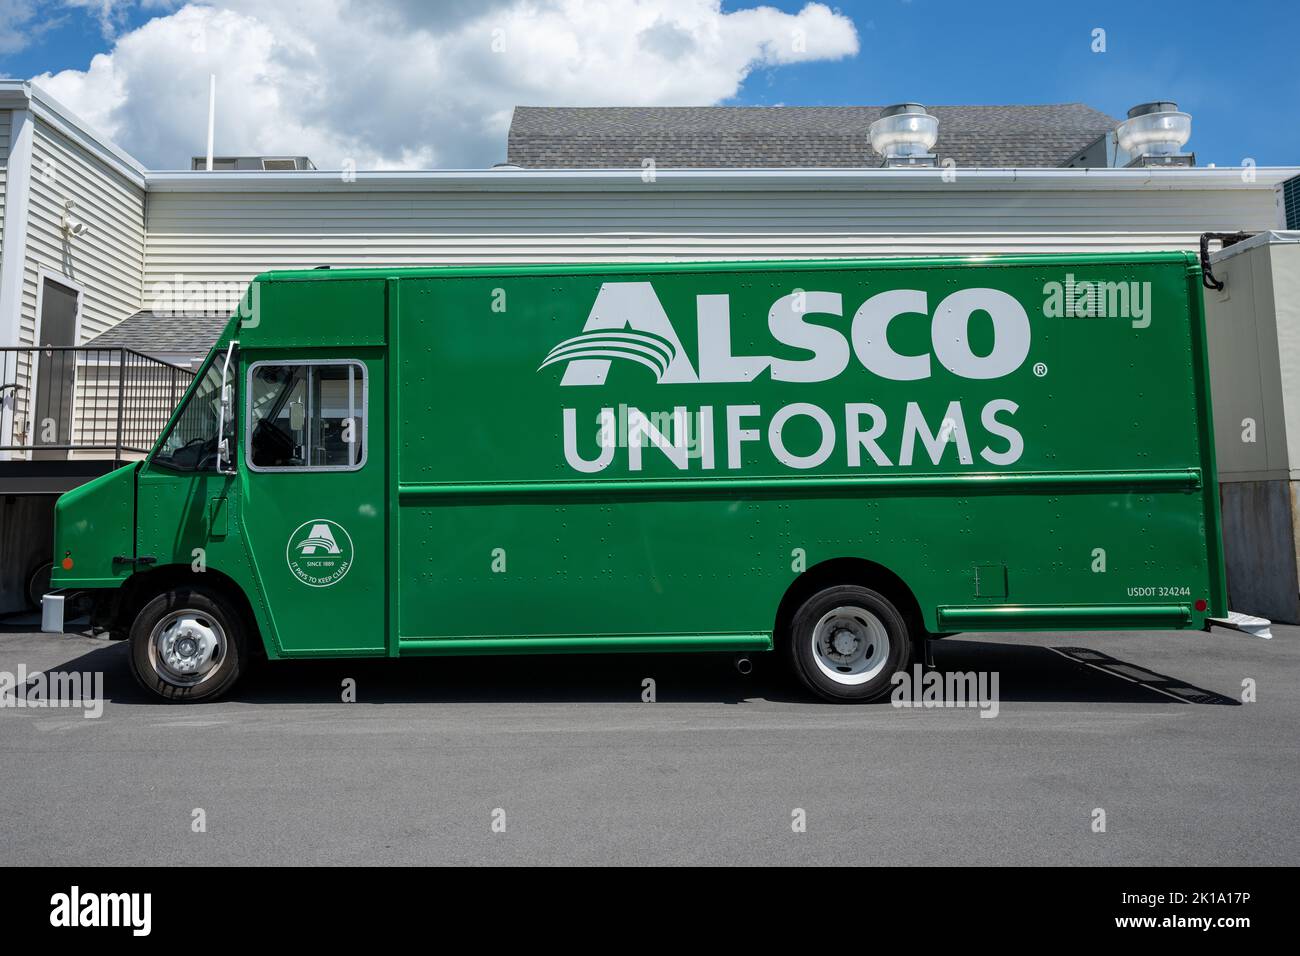 Canandaigua, NY - July 29, 2022: Alsco Uniforms truck is parked while making a delivery. Alsco is a linen and uniform rental business service provider Stock Photo